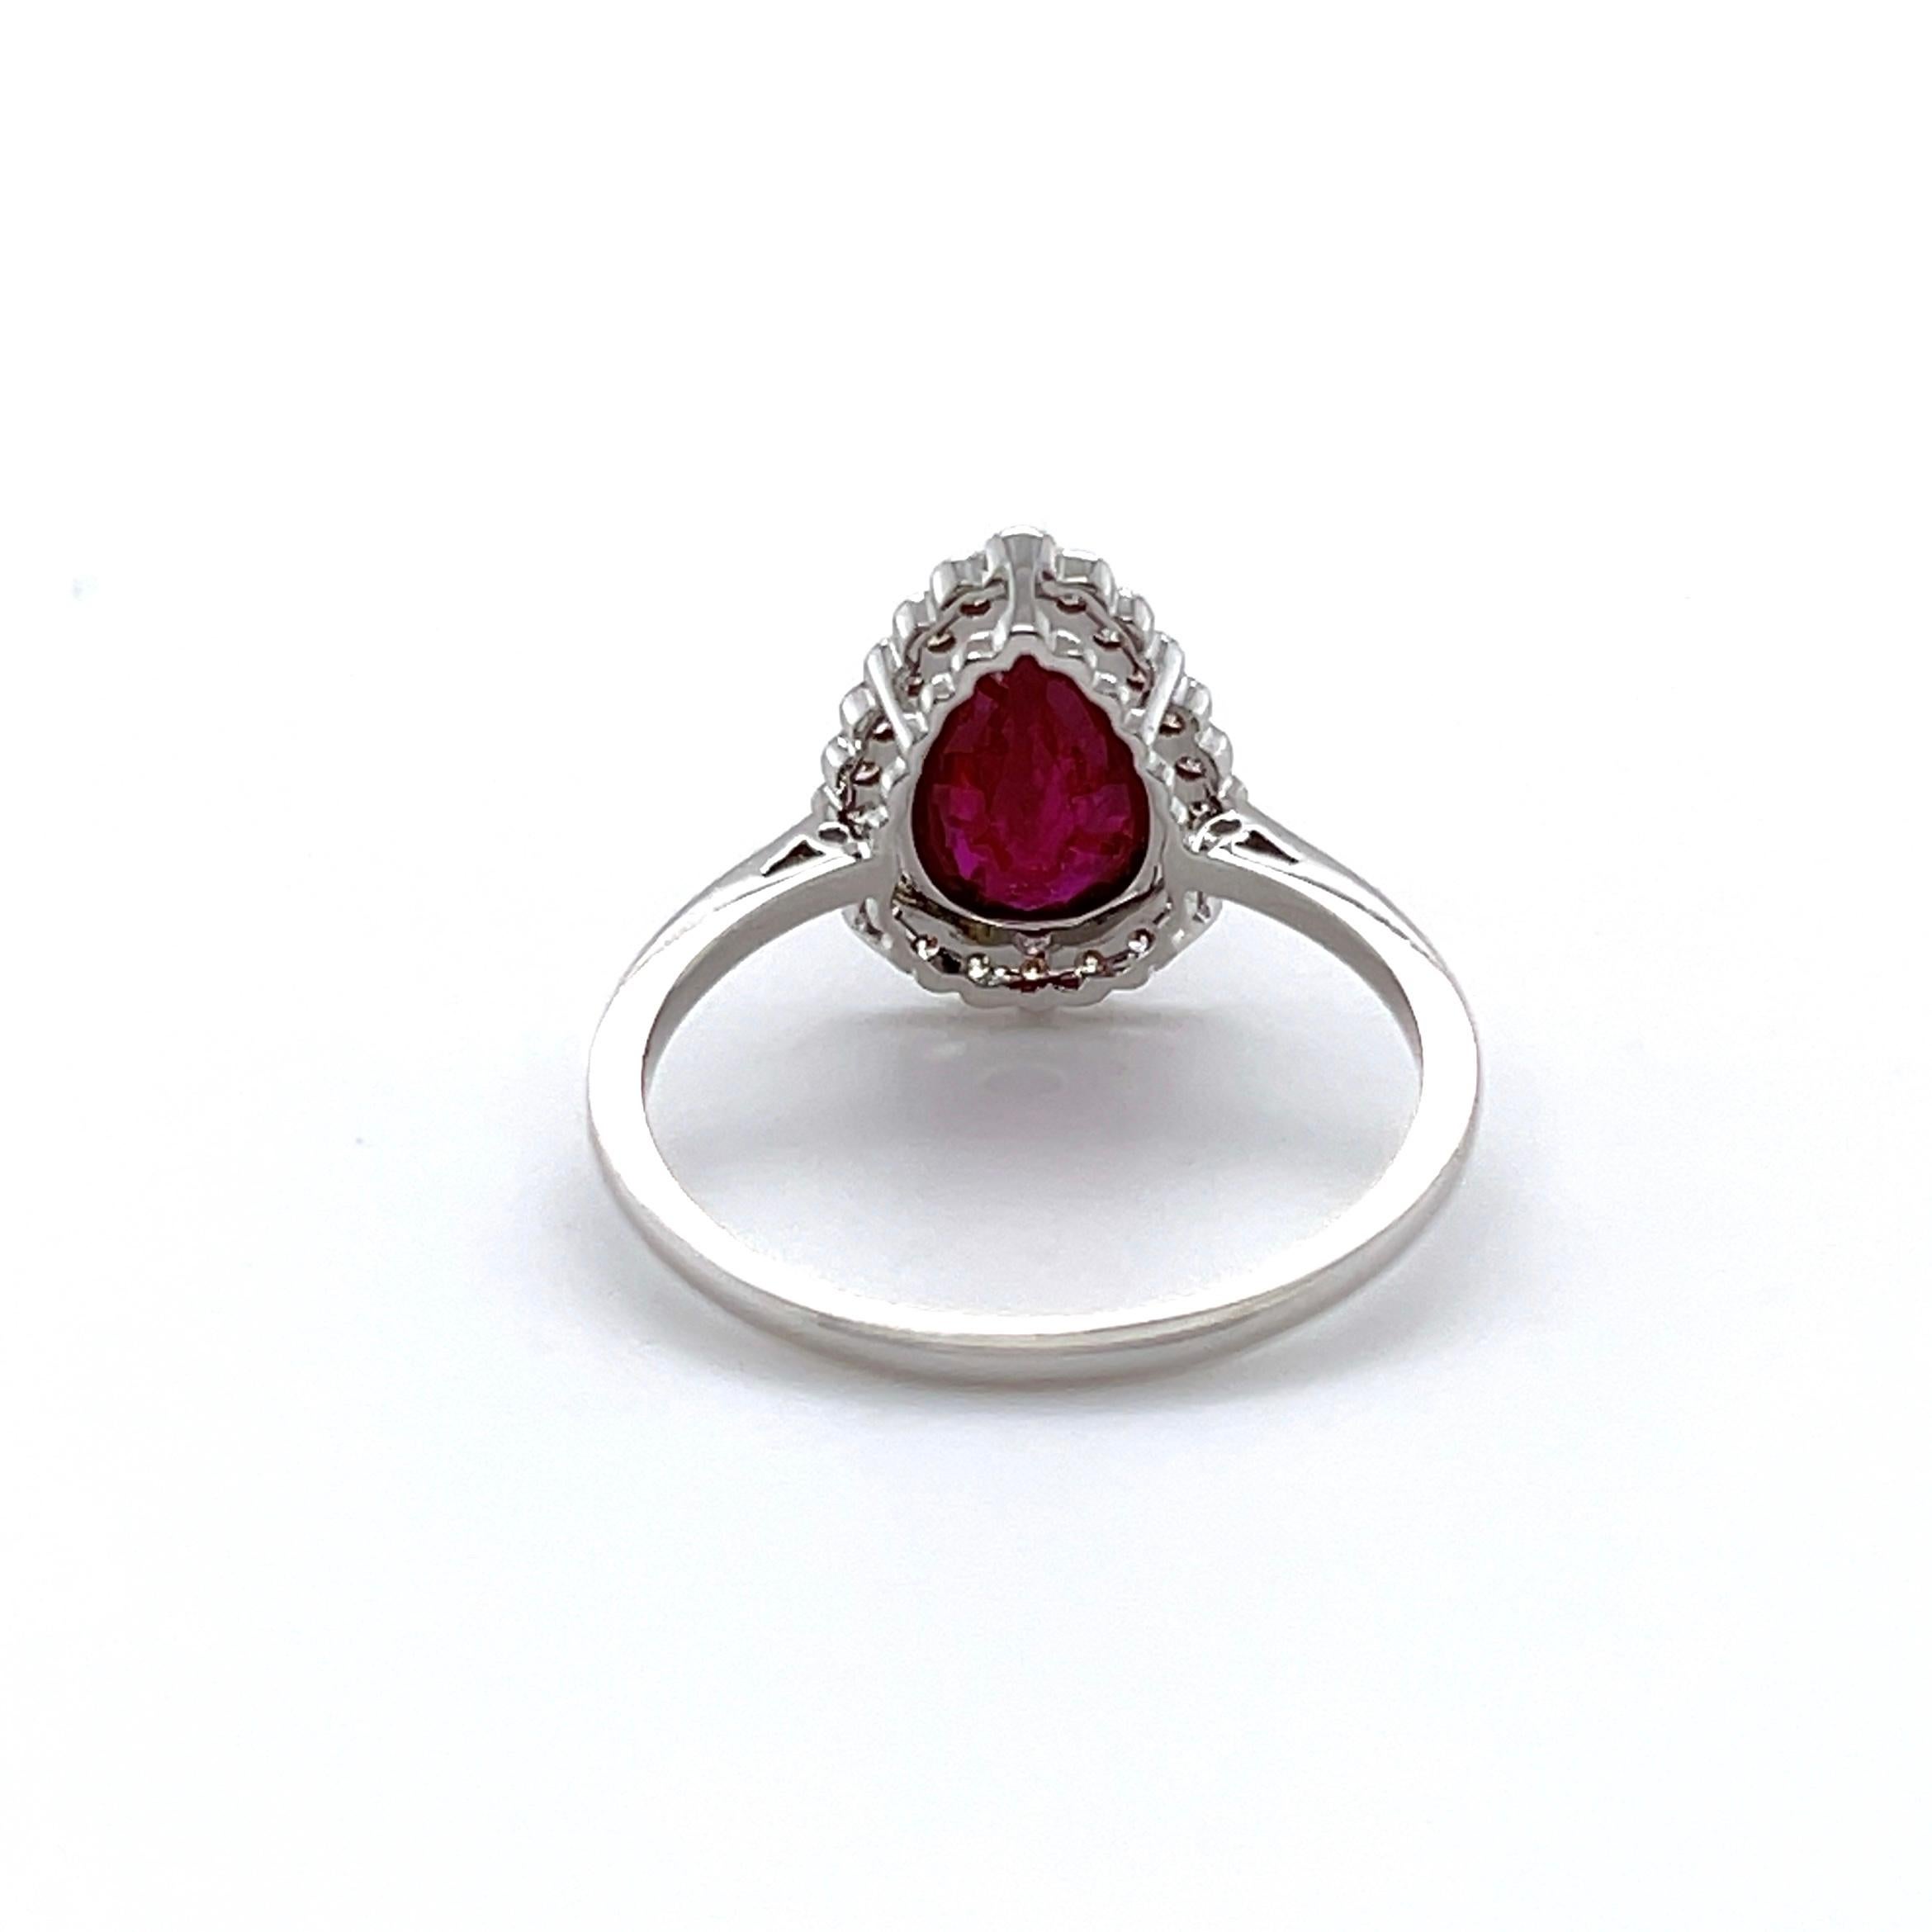 For Sale:  Imperial Jewels 18ct White and Rose Gold 'No Heat' Ruby and Diamond Ring 4